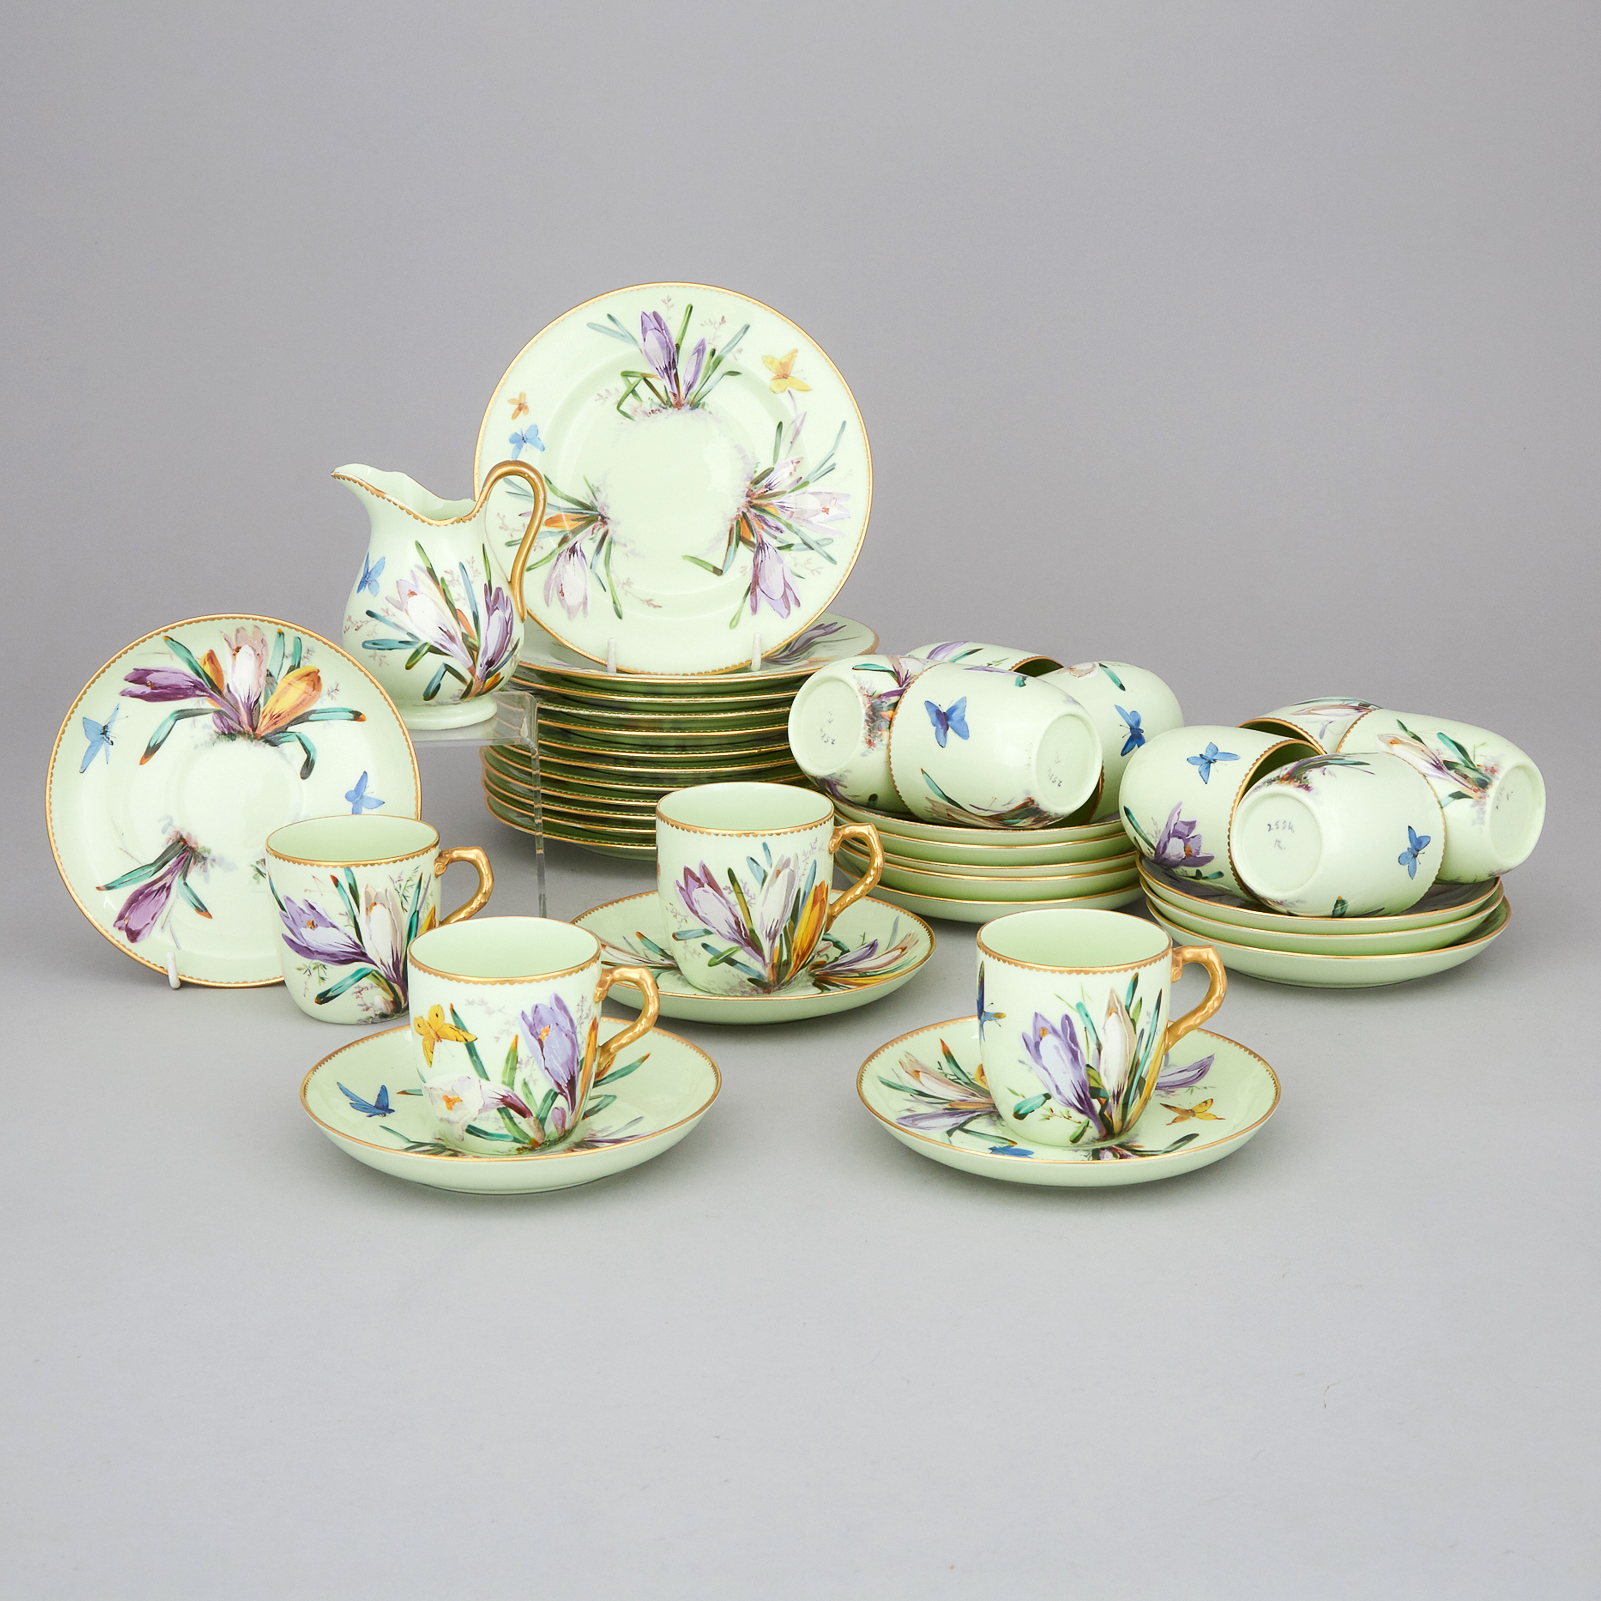 Brownfield Floral Enameled and Painted Tea Service, c.1870